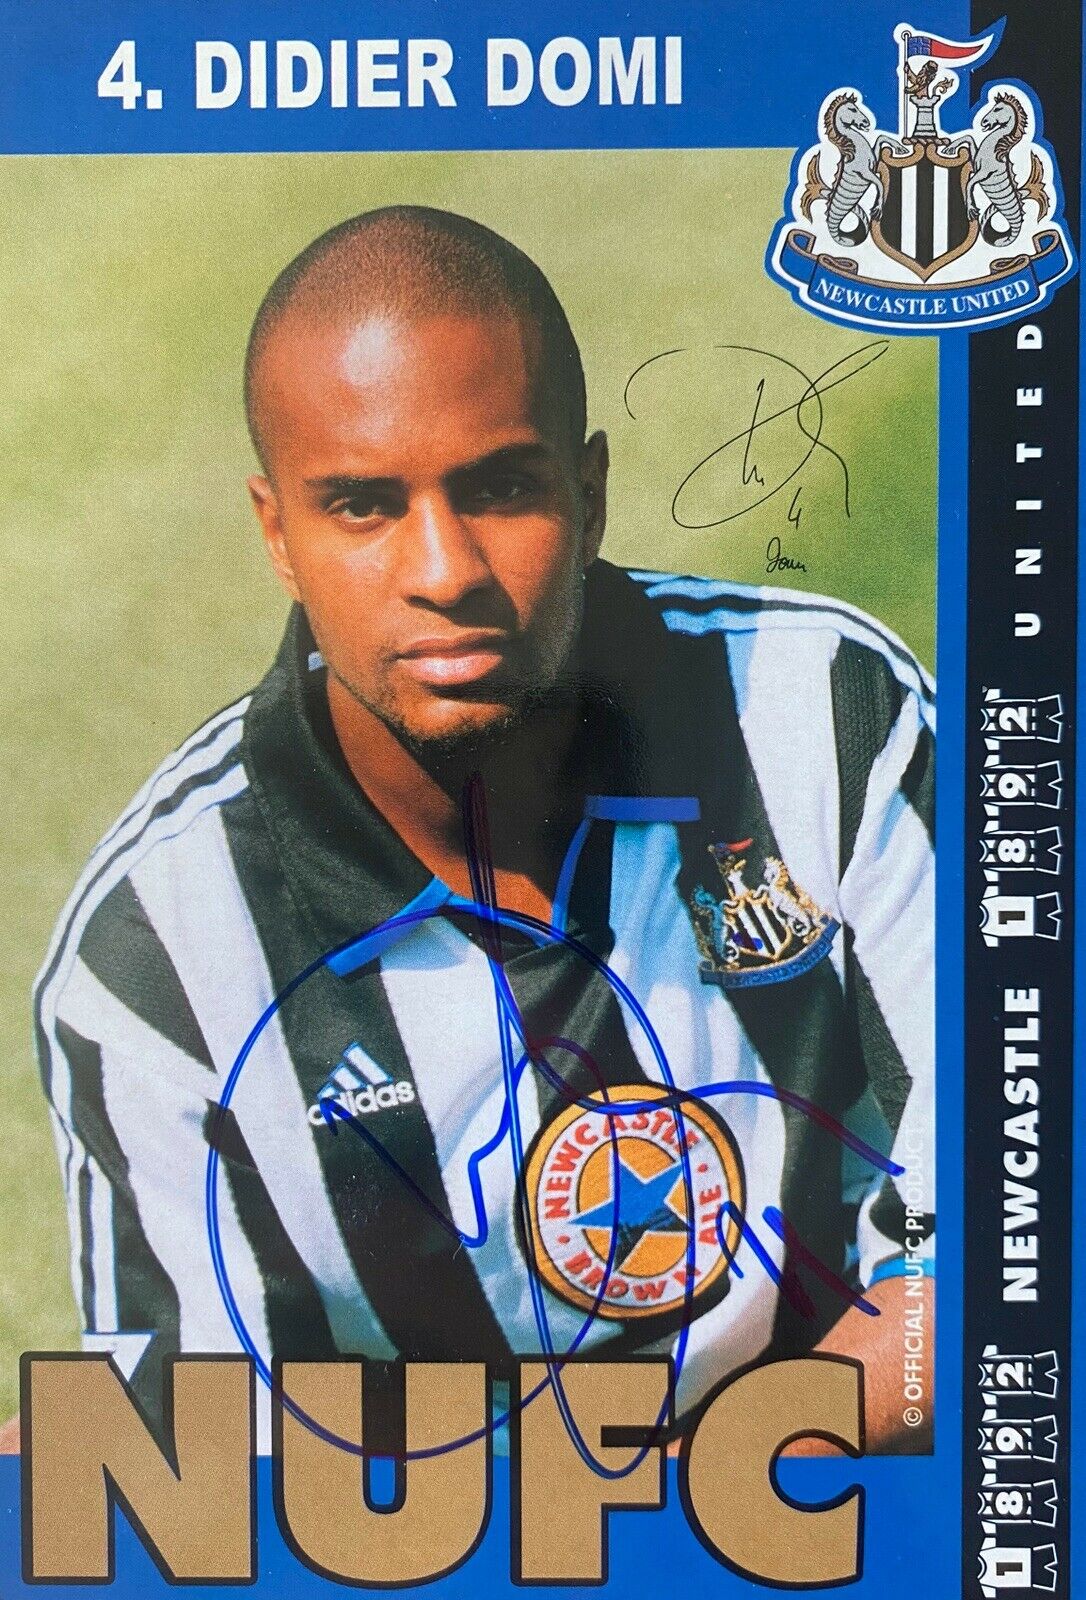 Didier Domi Genuine Hand Signed Newcastle United 6X4 Photo Poster painting / Card, PSG, Leeds, 1